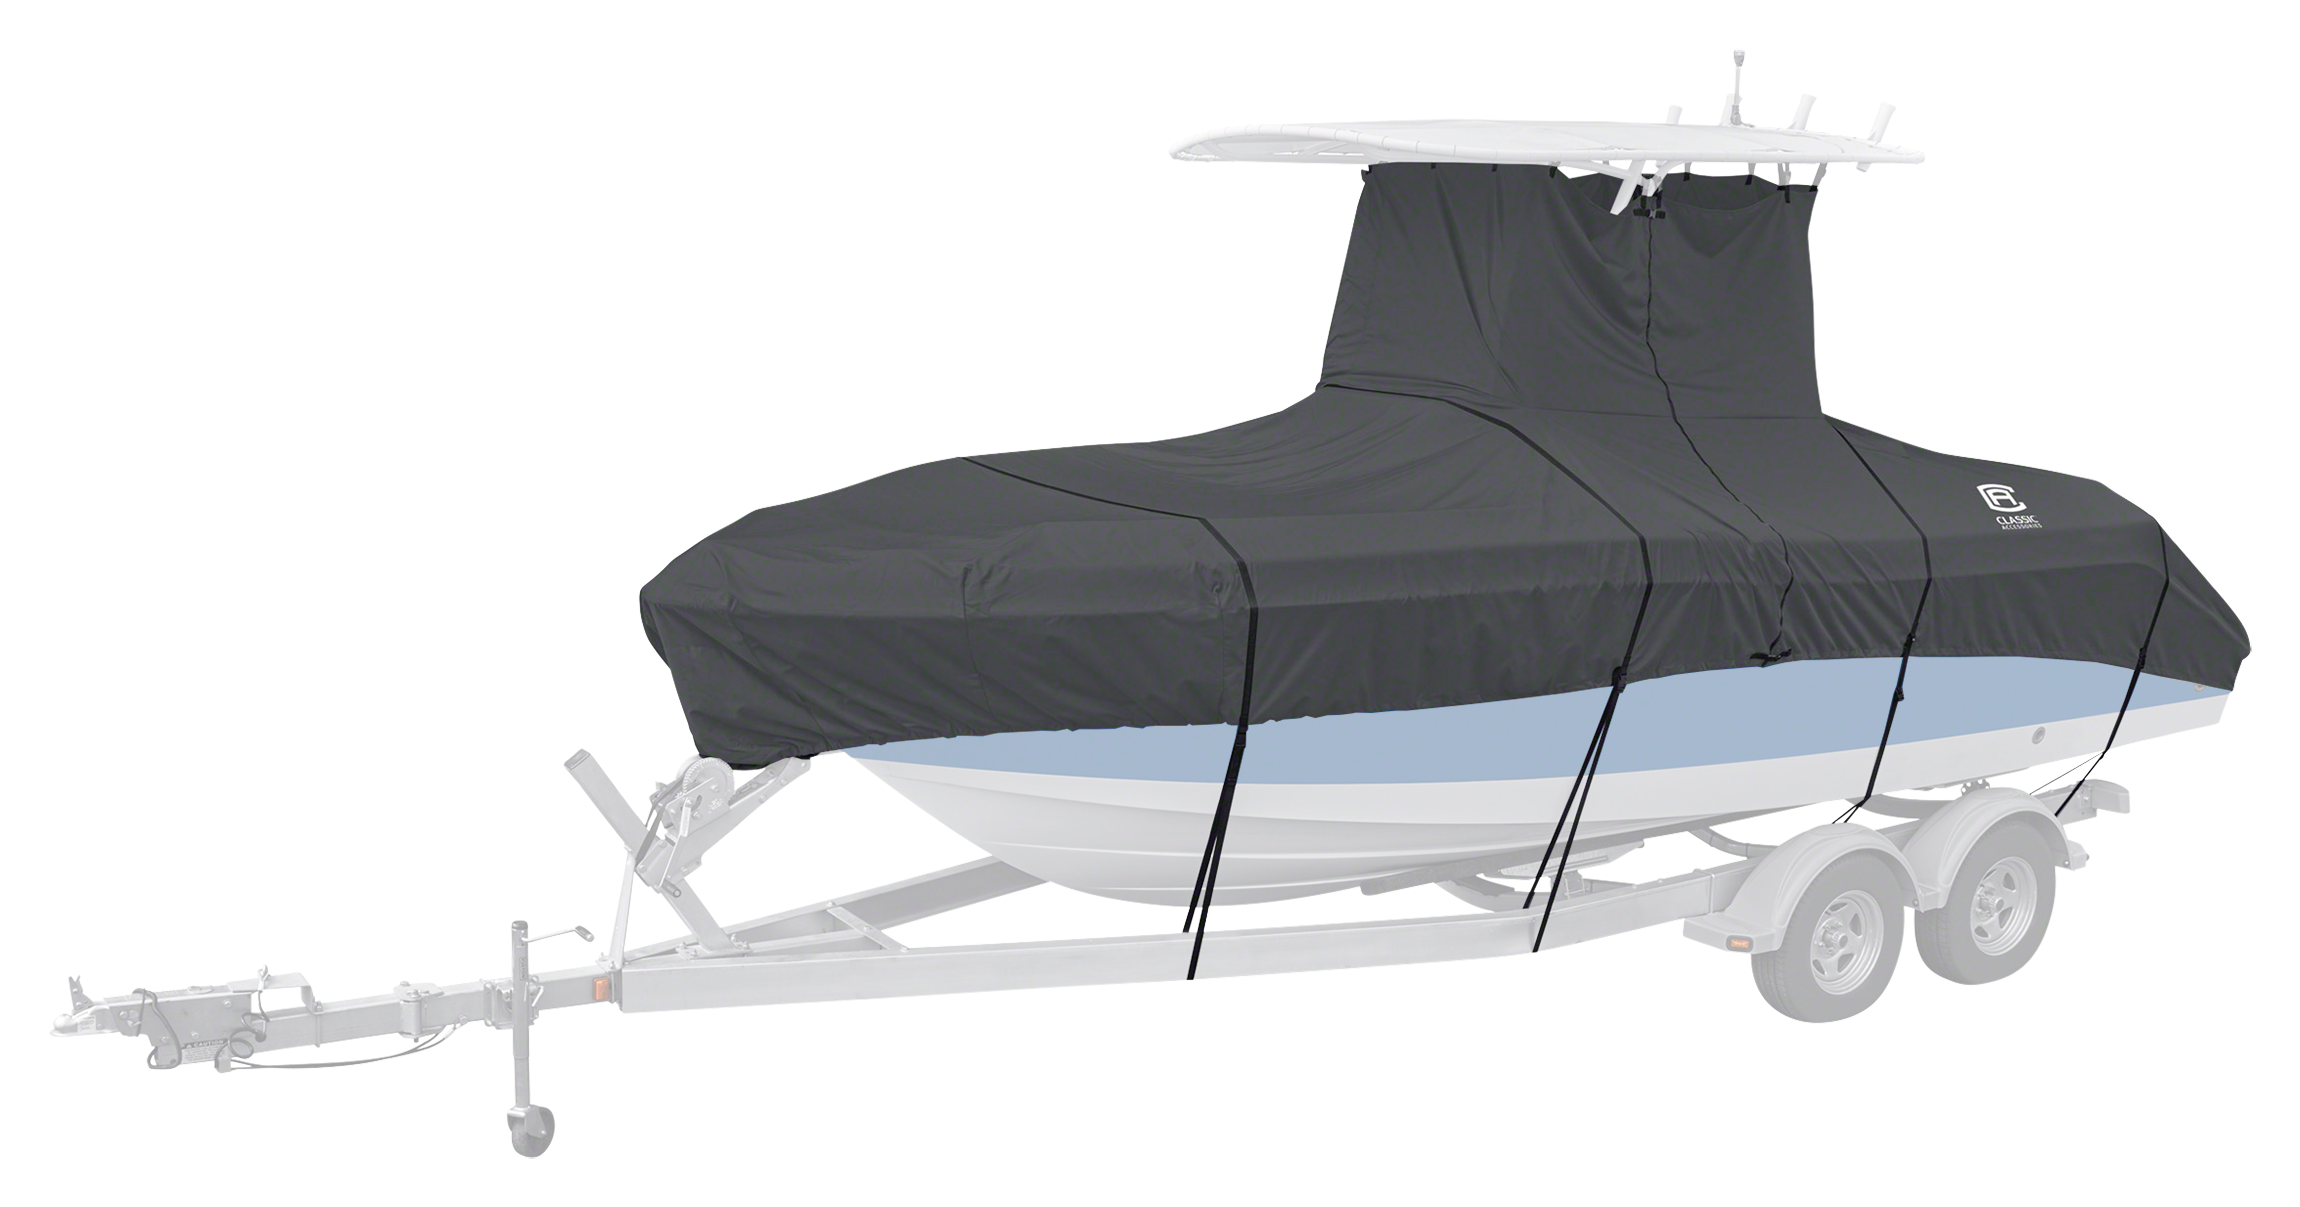 CENTER CONSOLE T TOP BOAT COVER